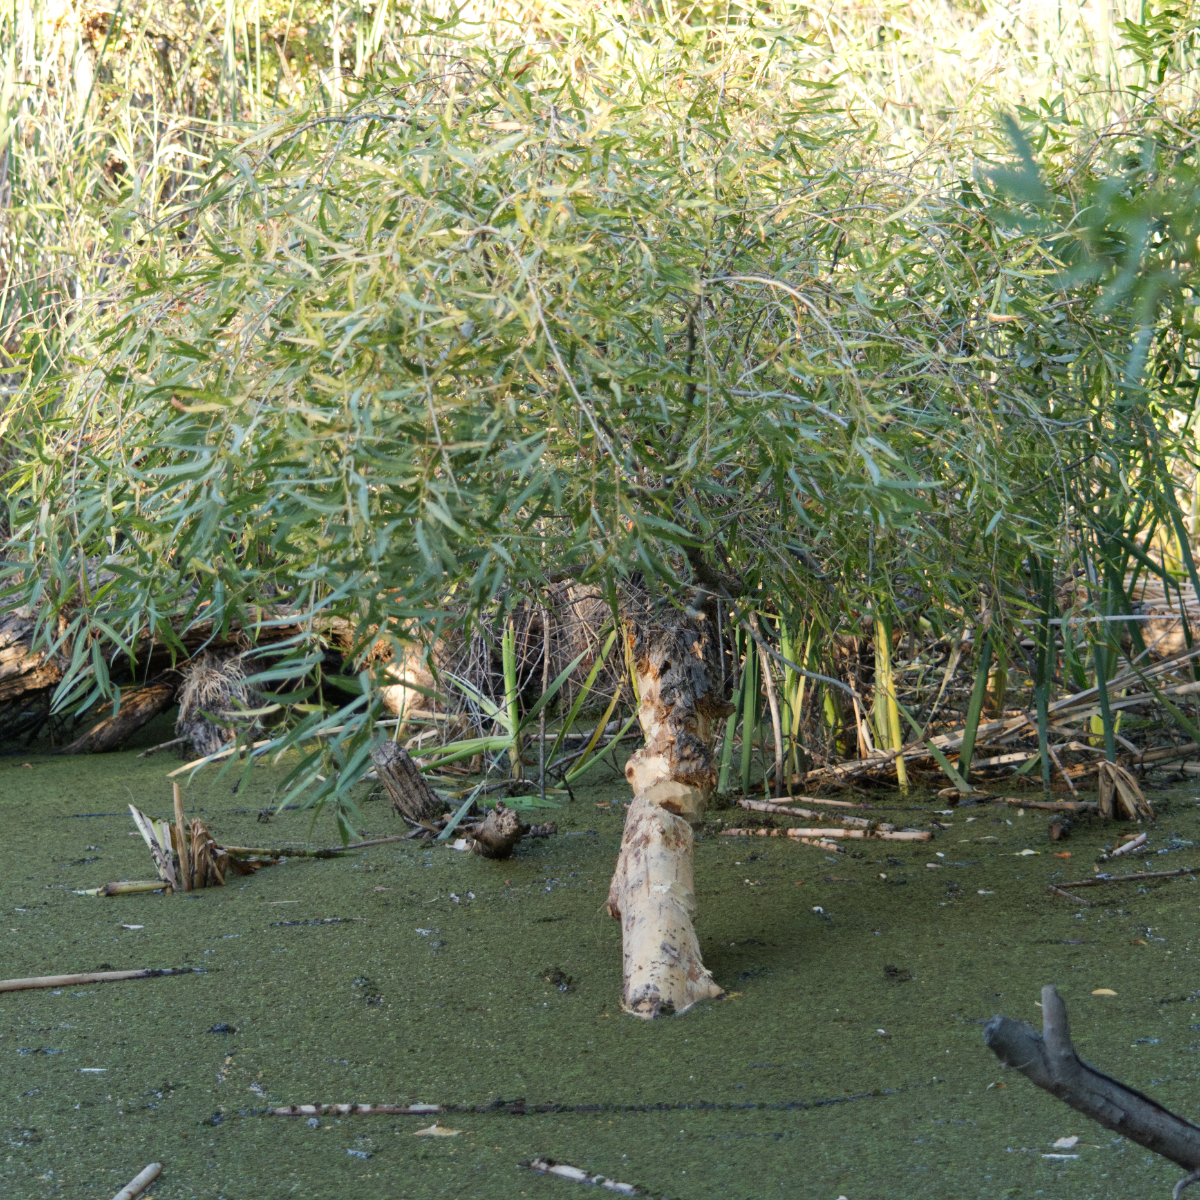 Willow eaten by Beavers, August 11, 2022